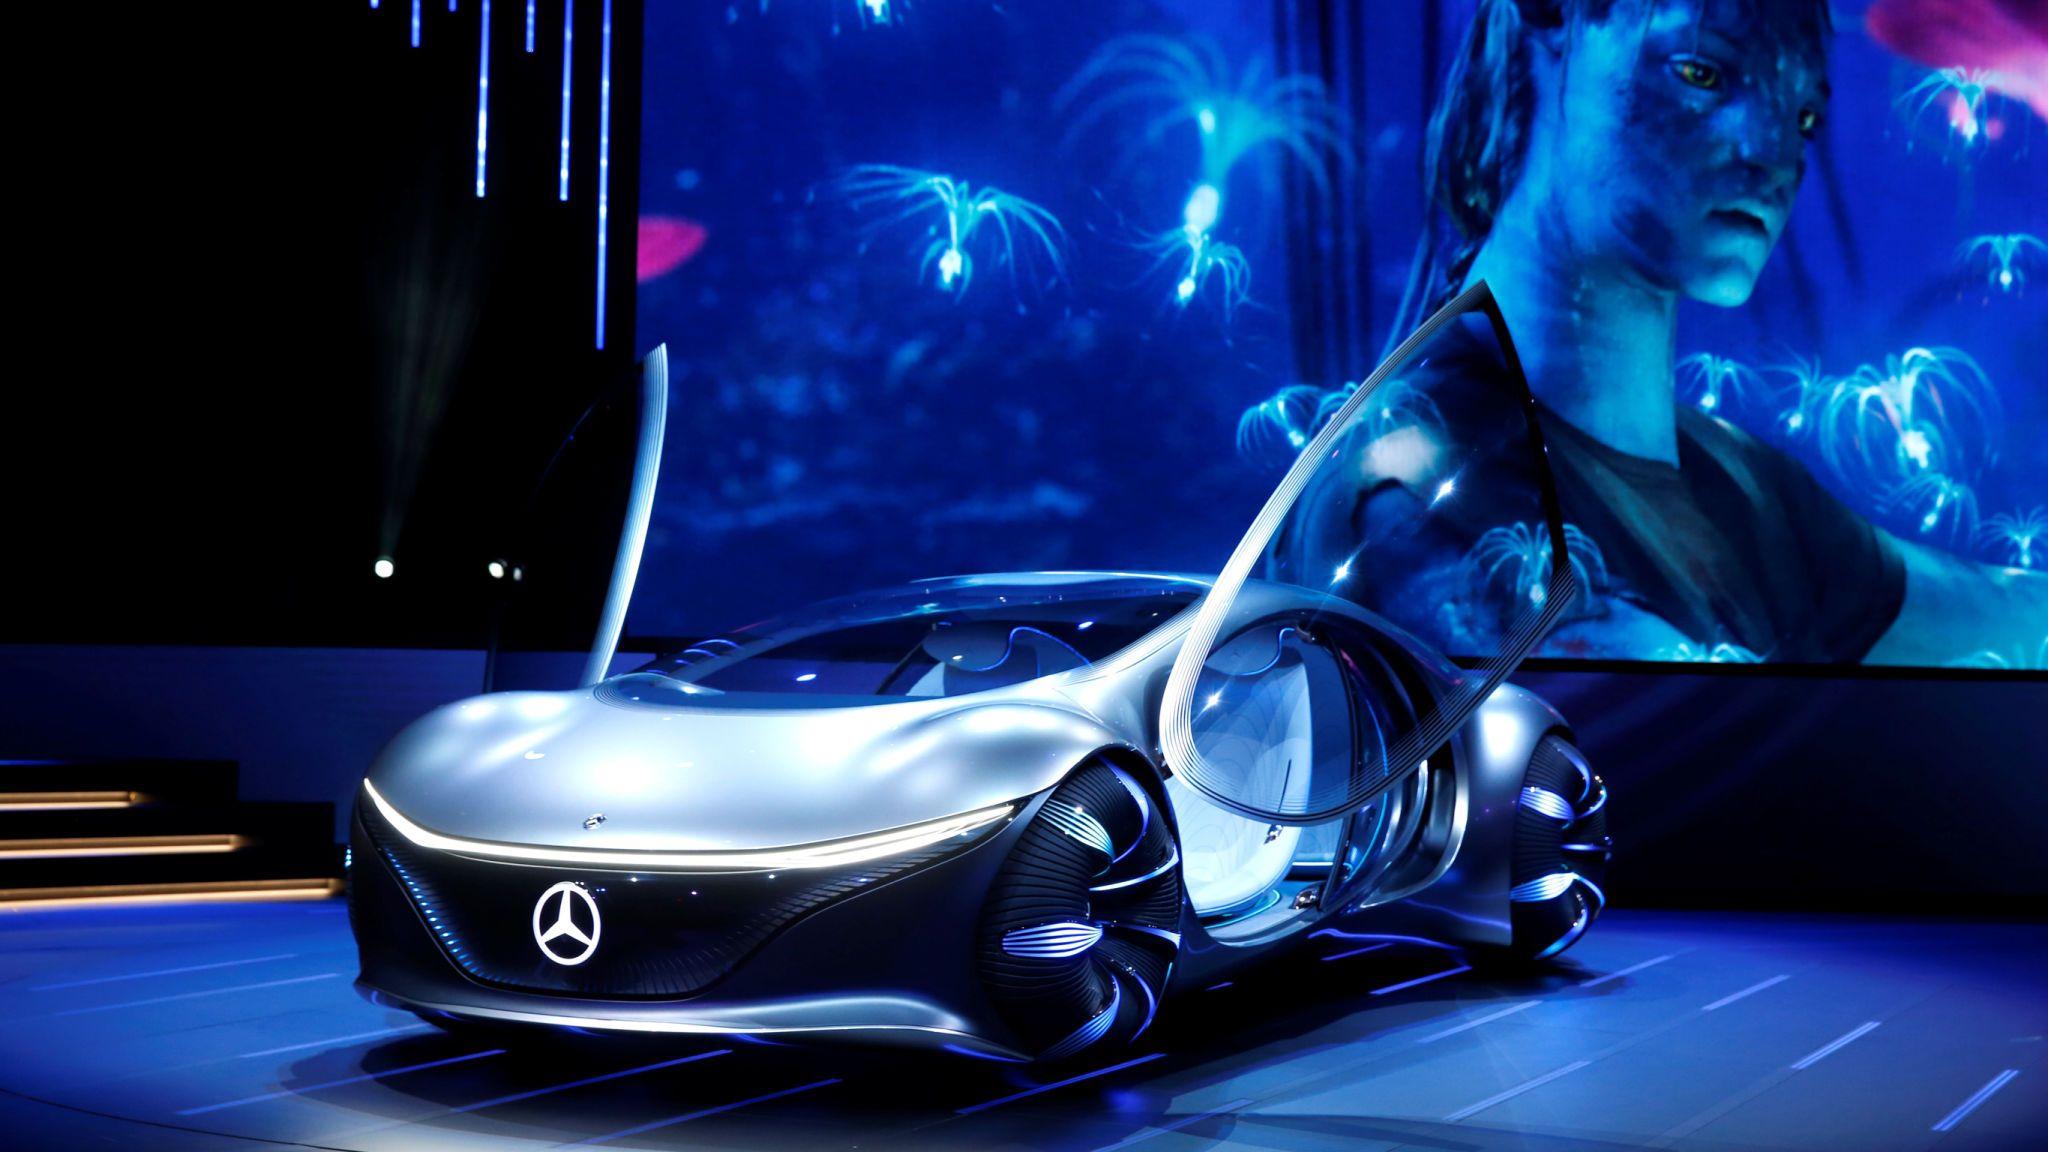 CES 2020: Mercedes Benz Unveils Concept Car Inspired By Film